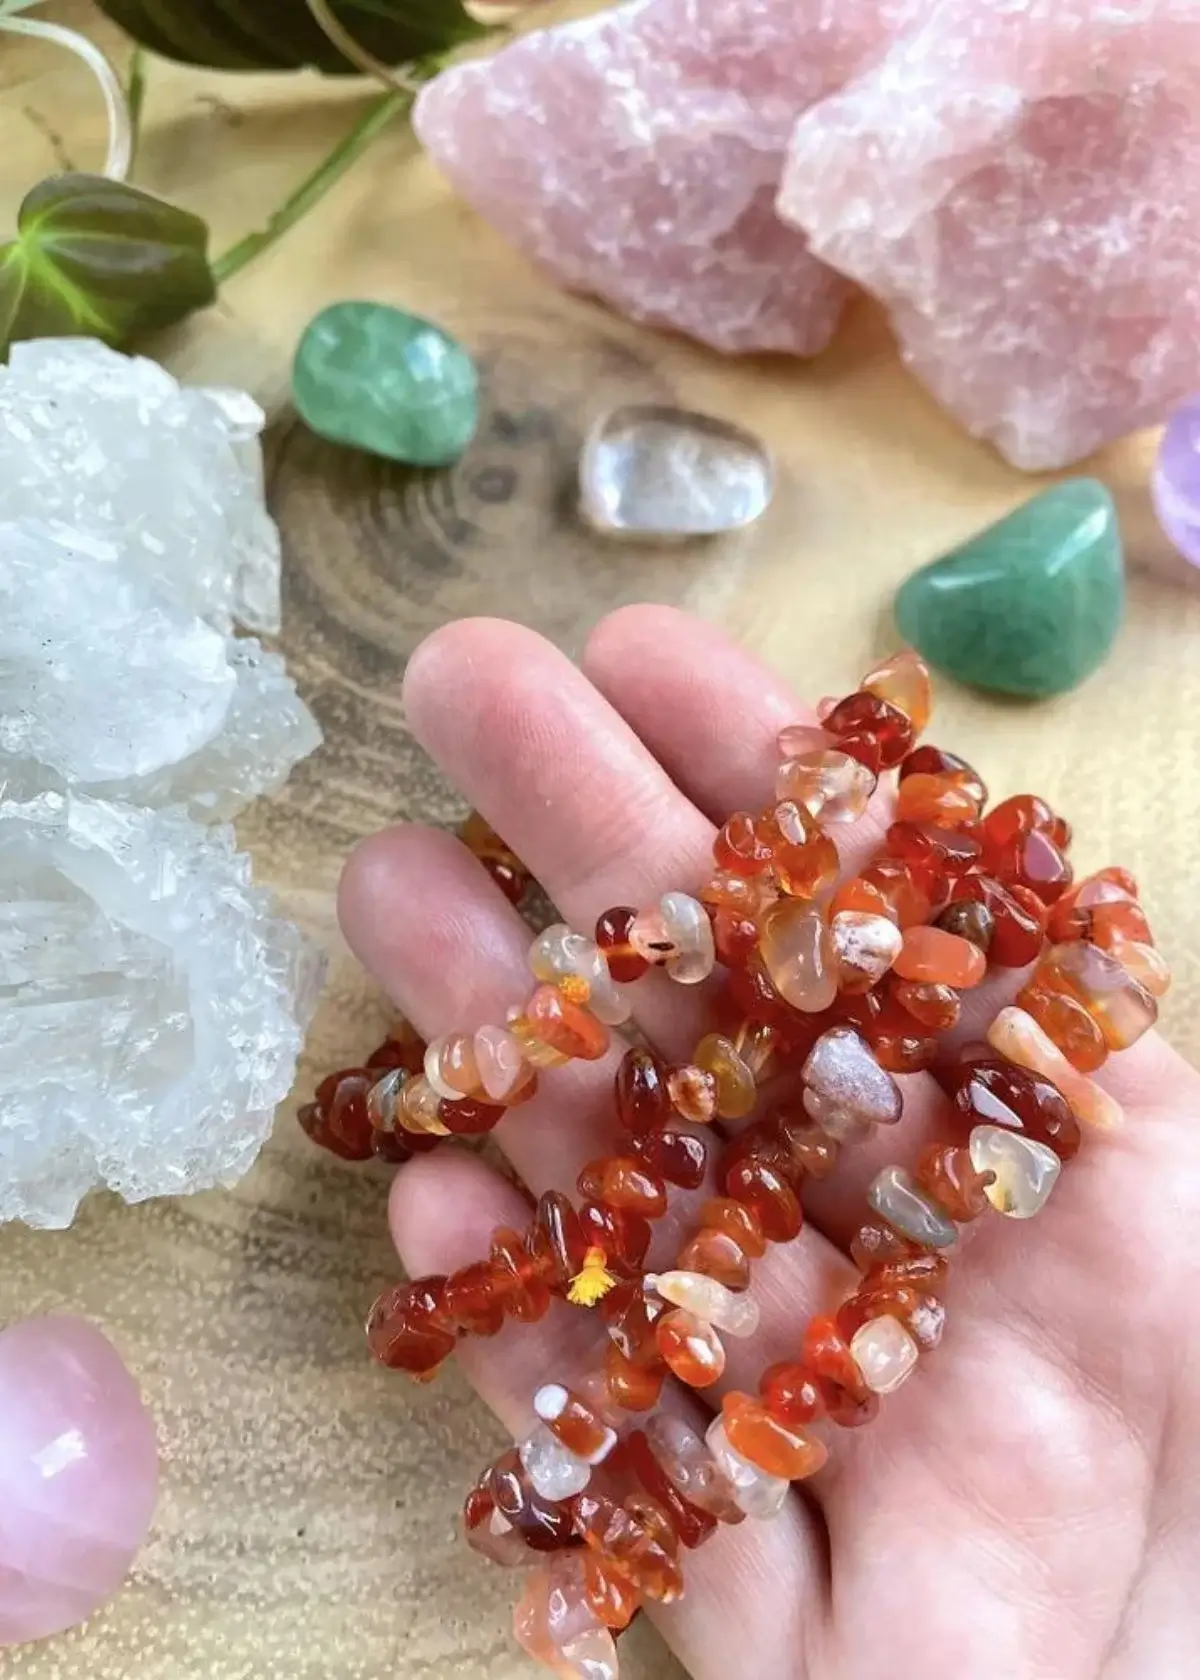 How can I Benefit from Wearing a Carnelian Crystal Bracelet?